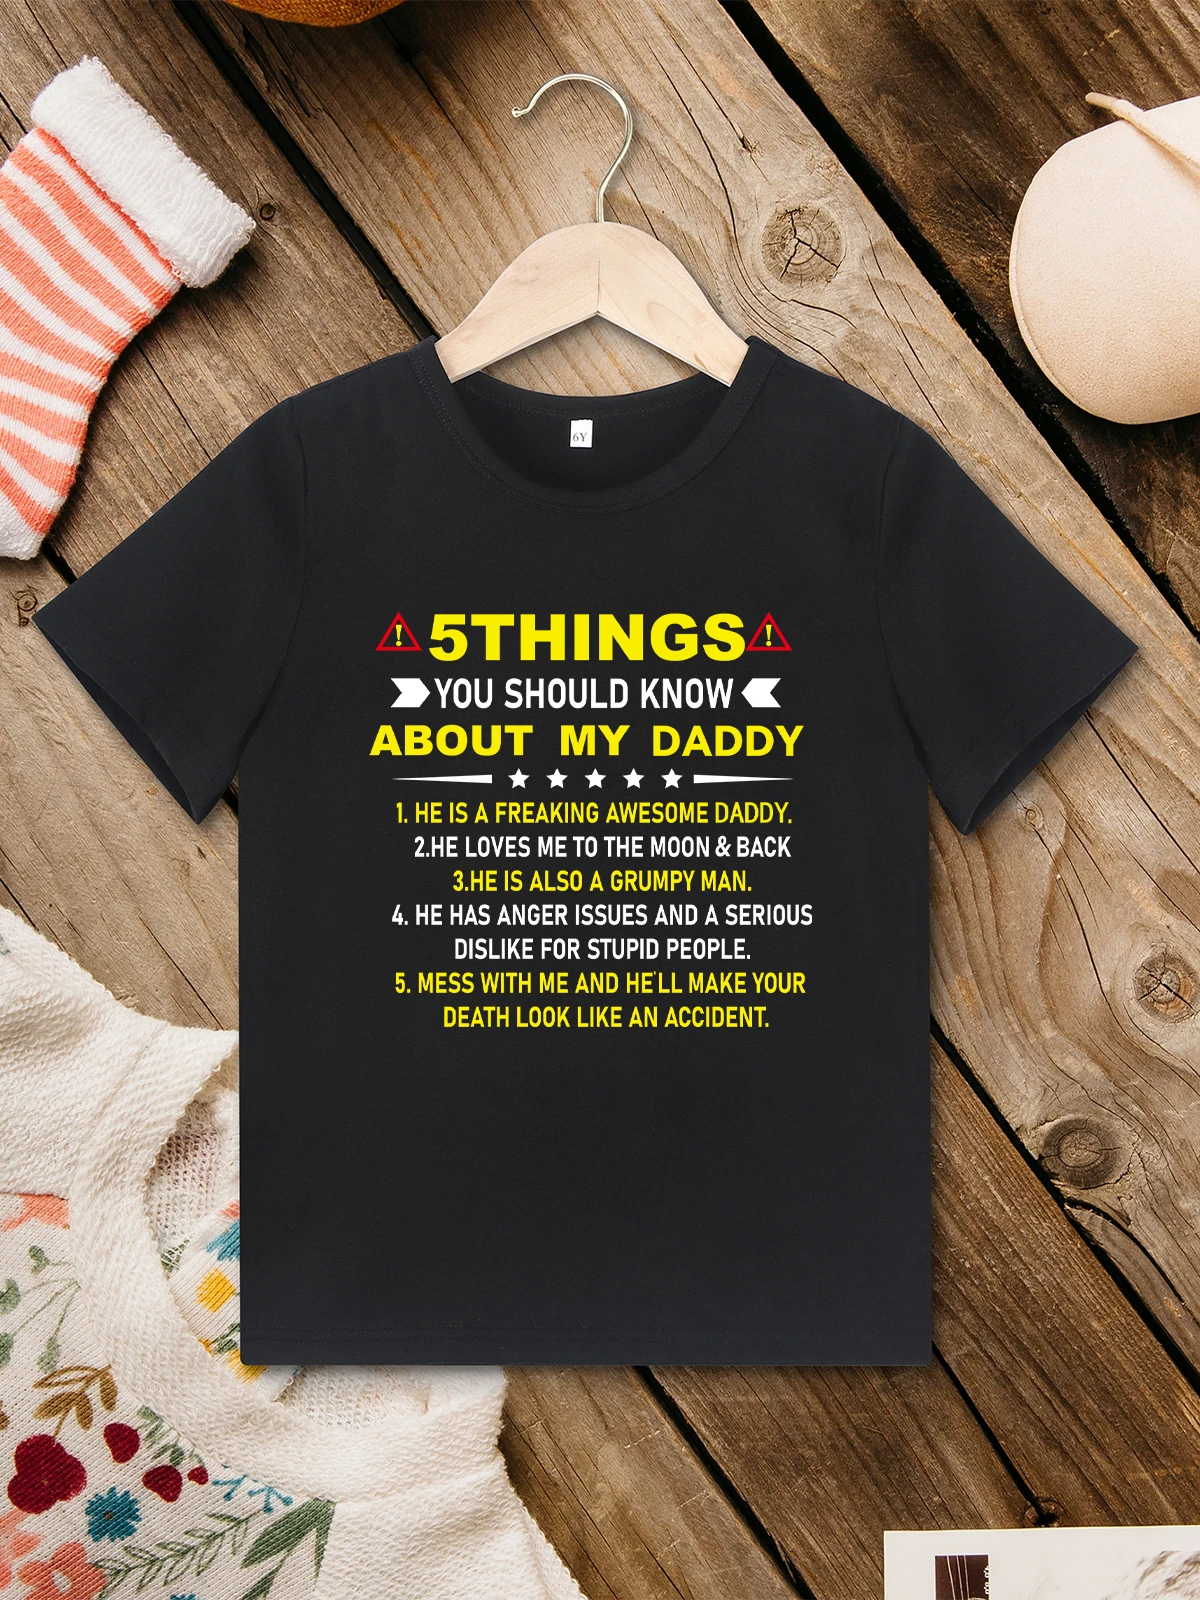 

My Daddy 5 Things Letter Print Kids T Shirt Fun Fashion Summer Unisex T-shirt Loose Comfy 3 to 7 Years Boys and Girls Clothes